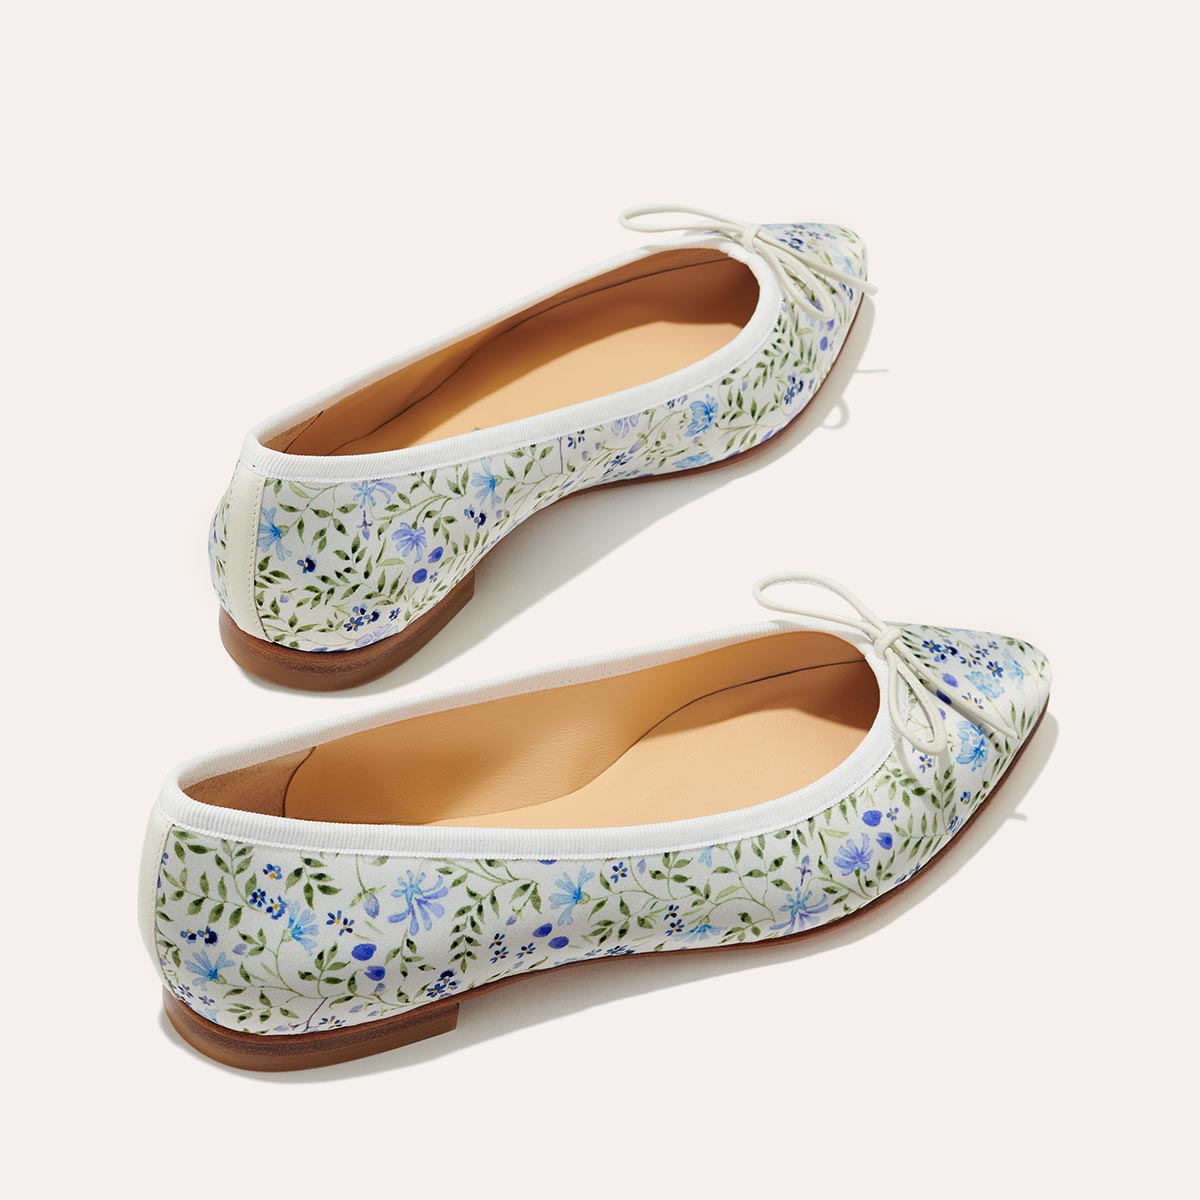 OTM Exclusive: The Pointe in Riley Sheehey Ivory Floral Satin